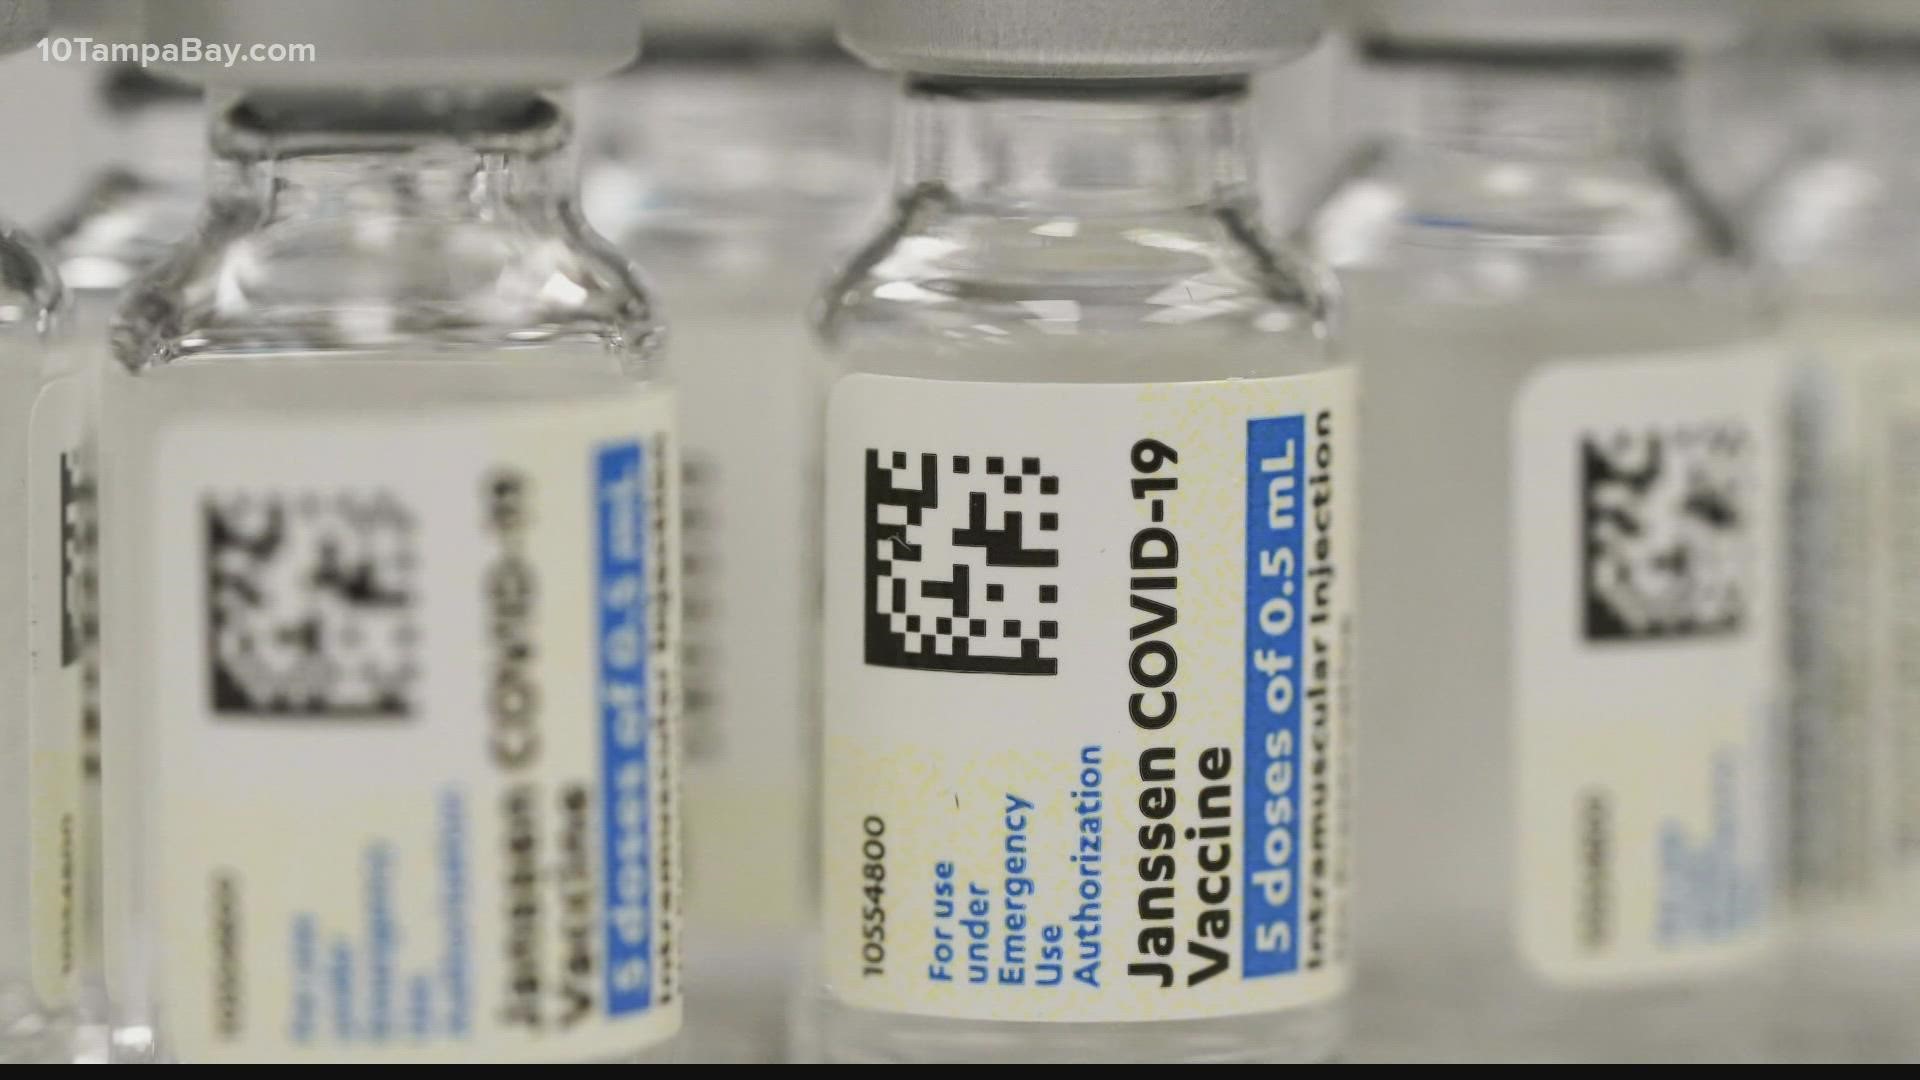 The U.S. government last month authorized booster doses of Pfizer's vaccine in vulnerable groups.